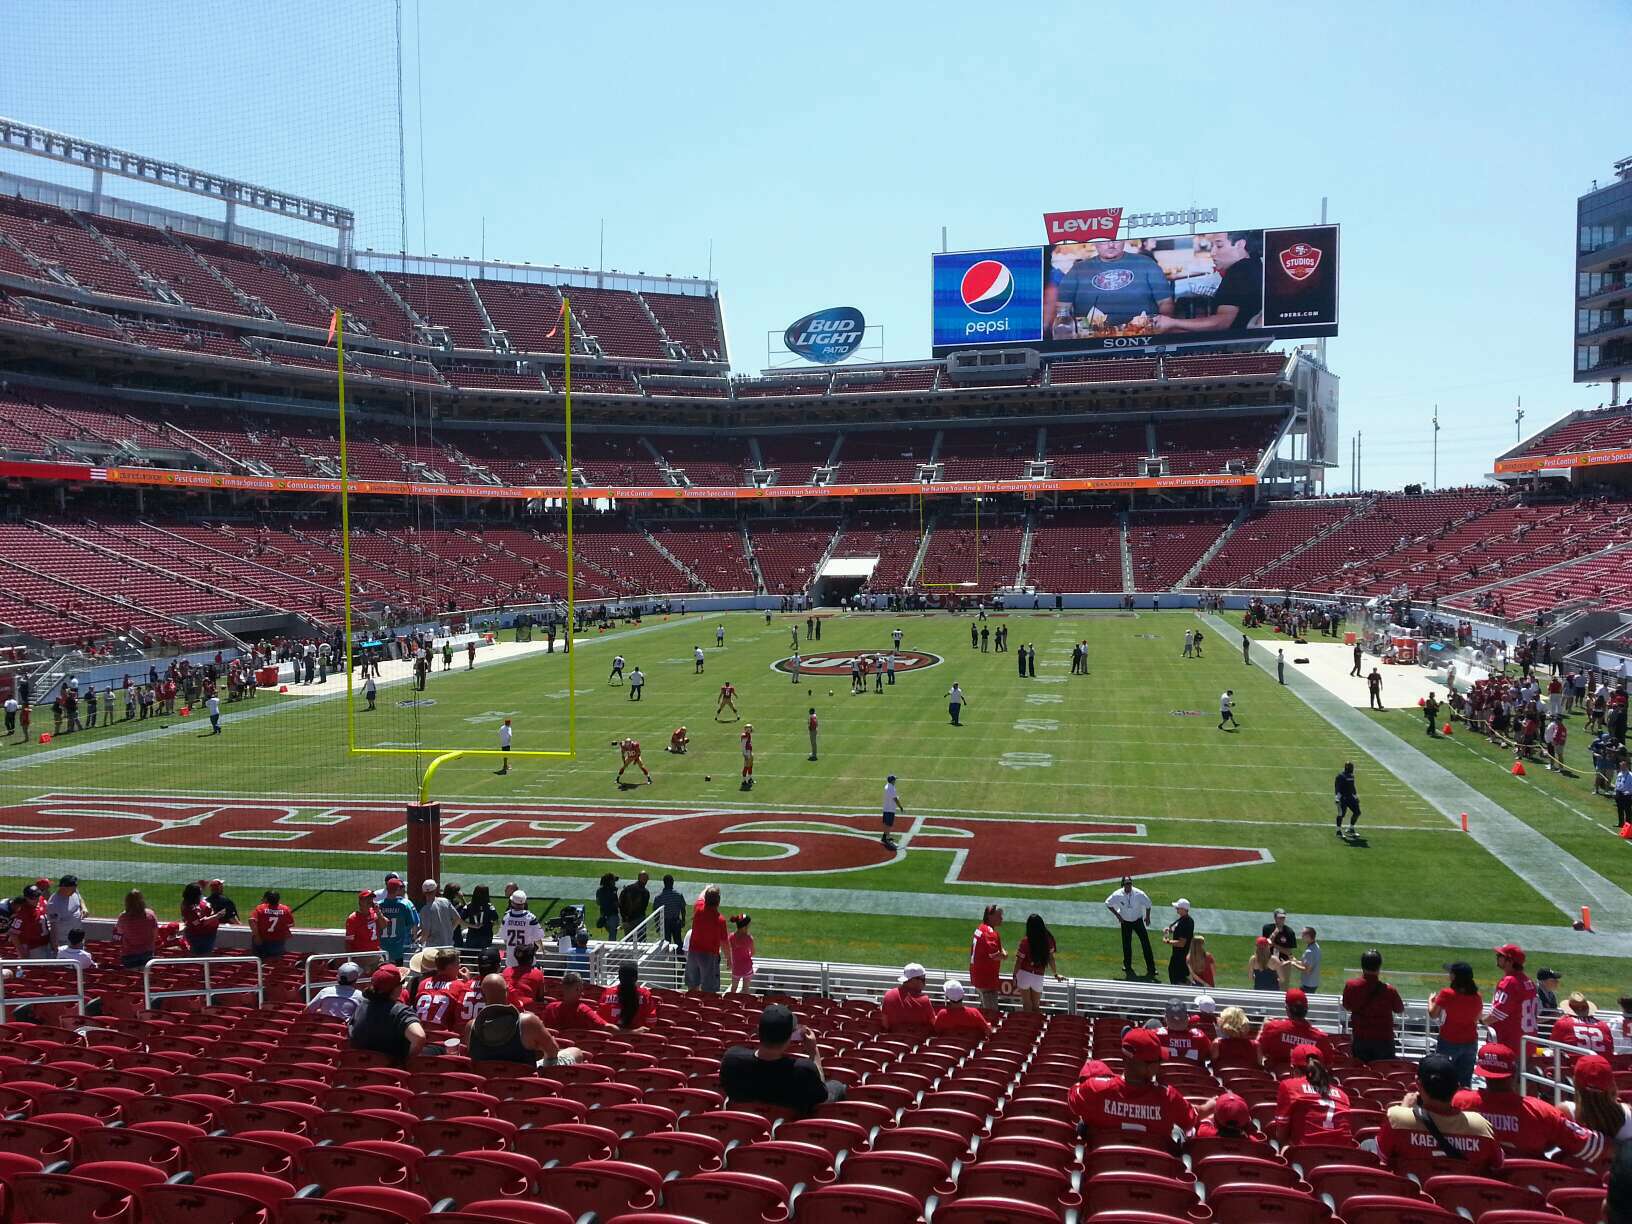 View of the field at Levi's Stadium, home of the San Francisco 49ers.